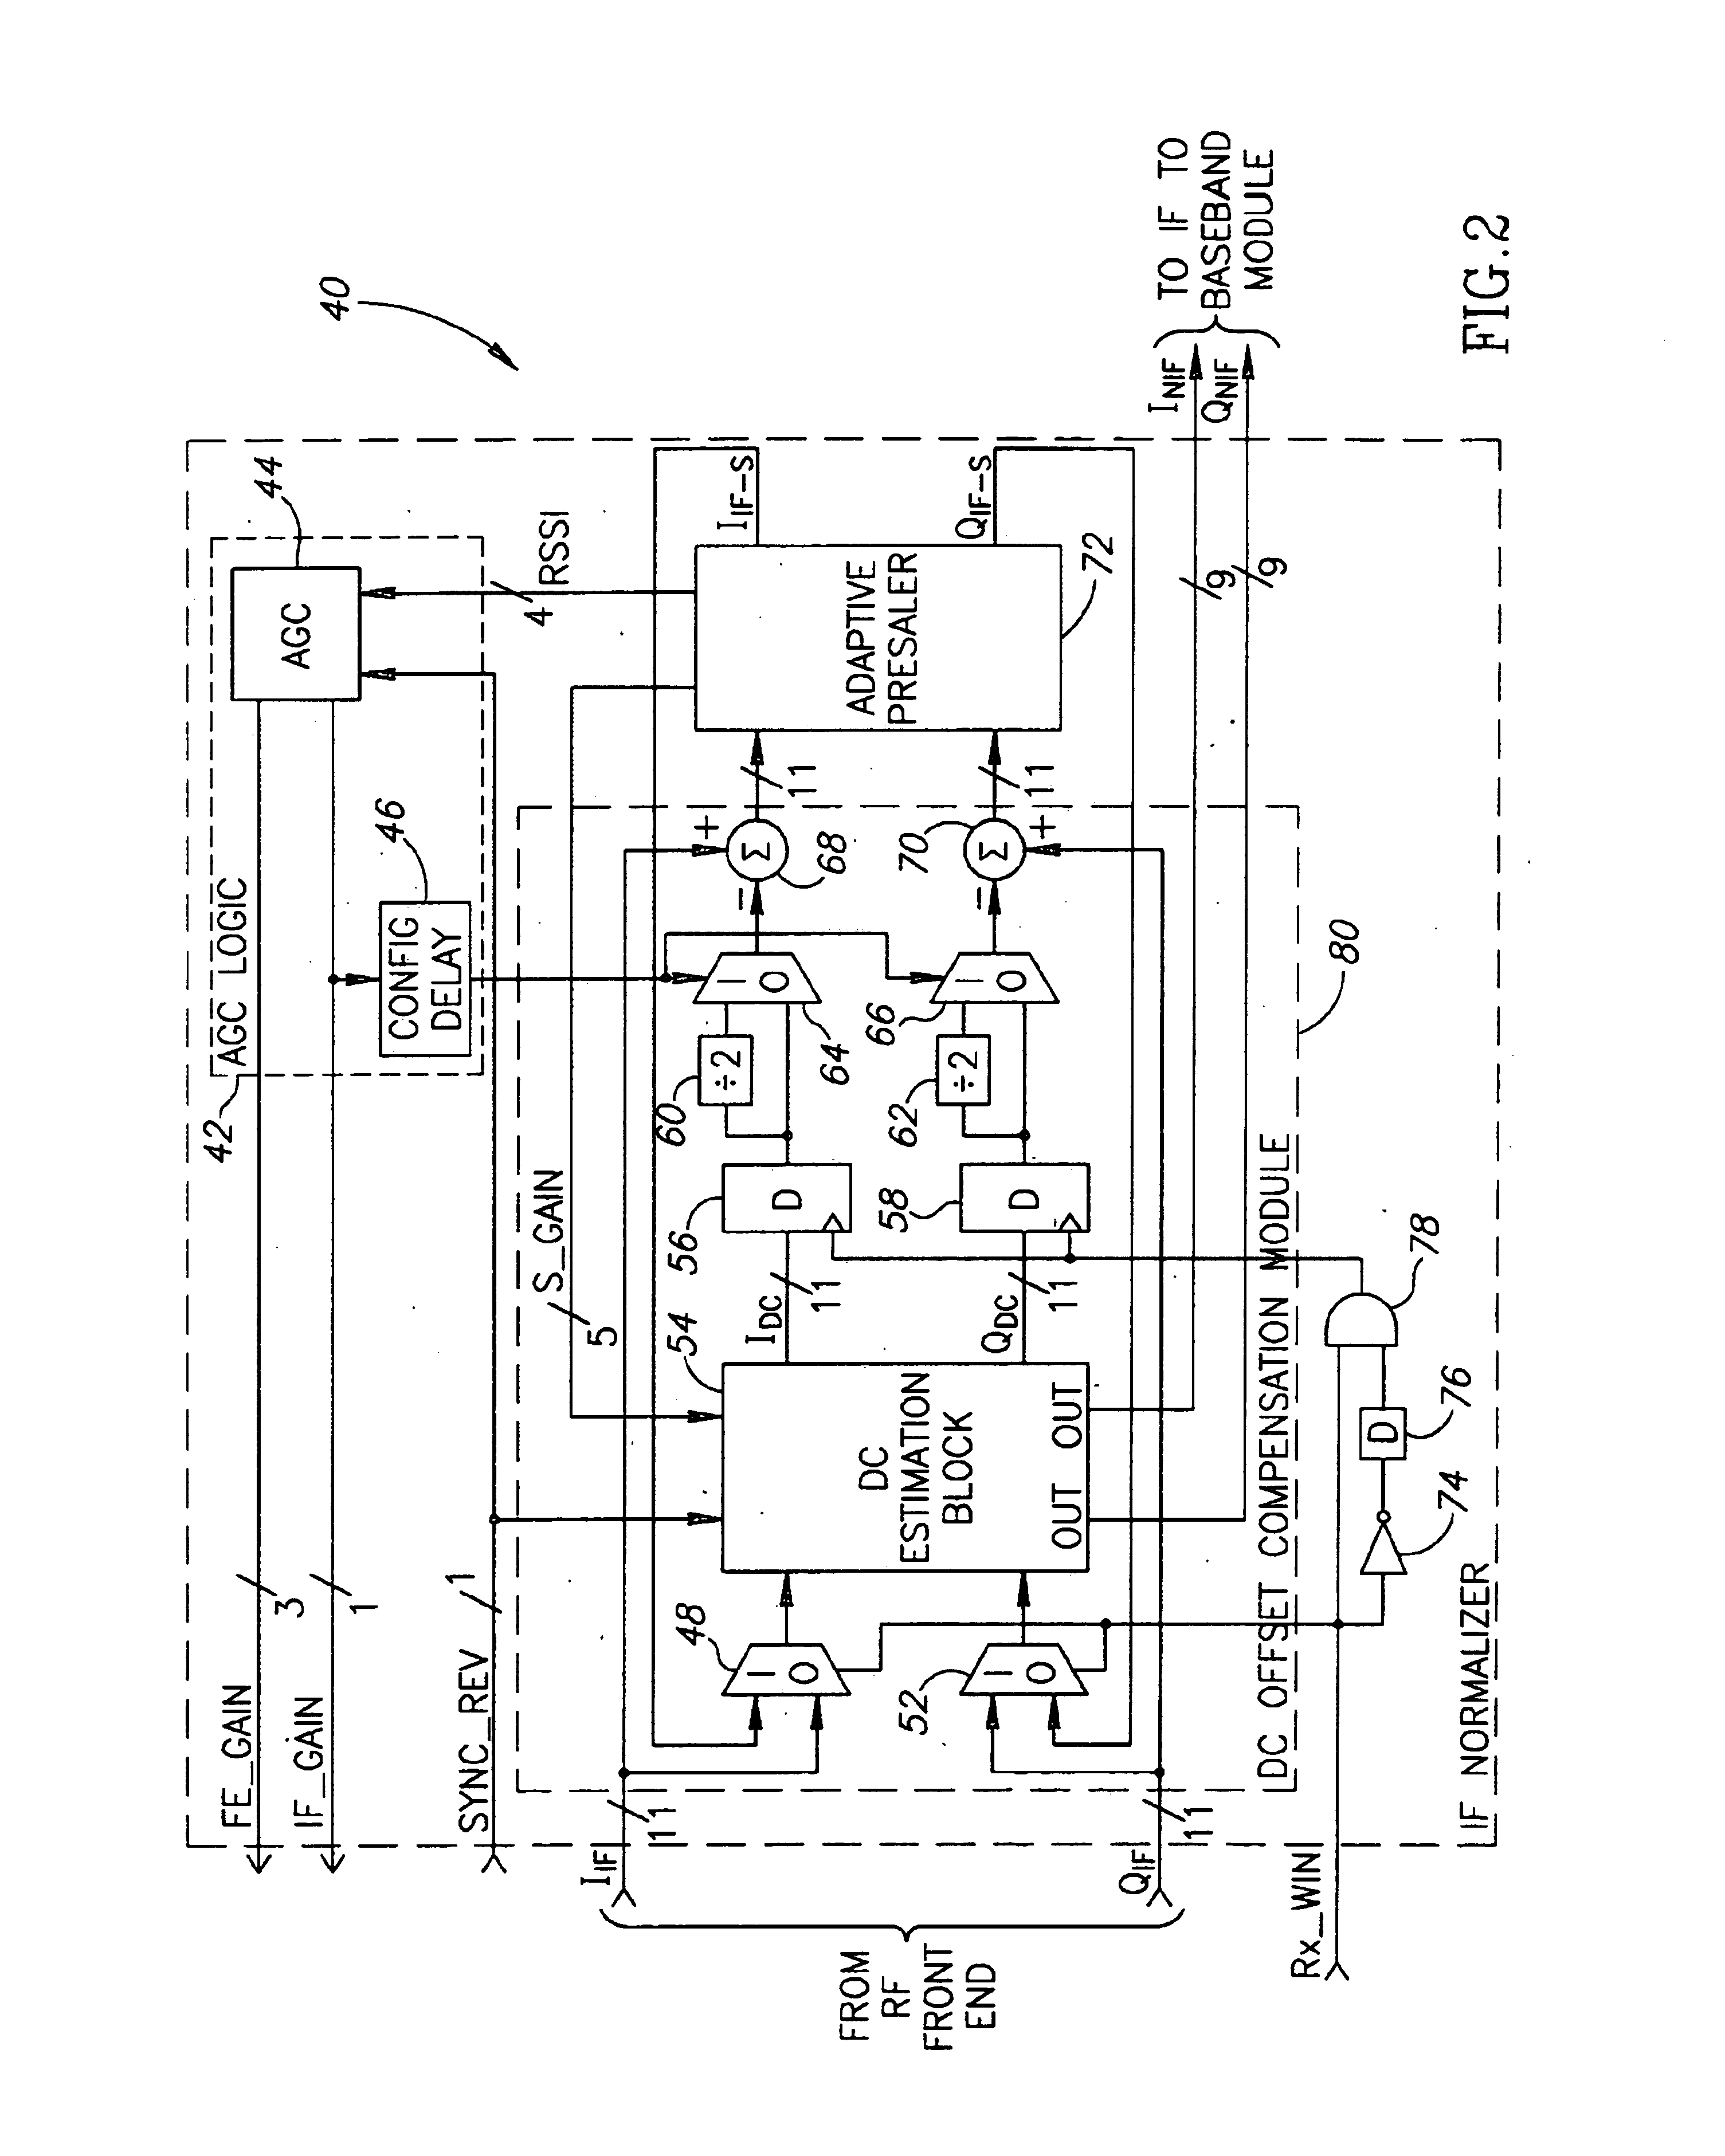 Adjustment of amplitude and DC offsets in a digital receiver